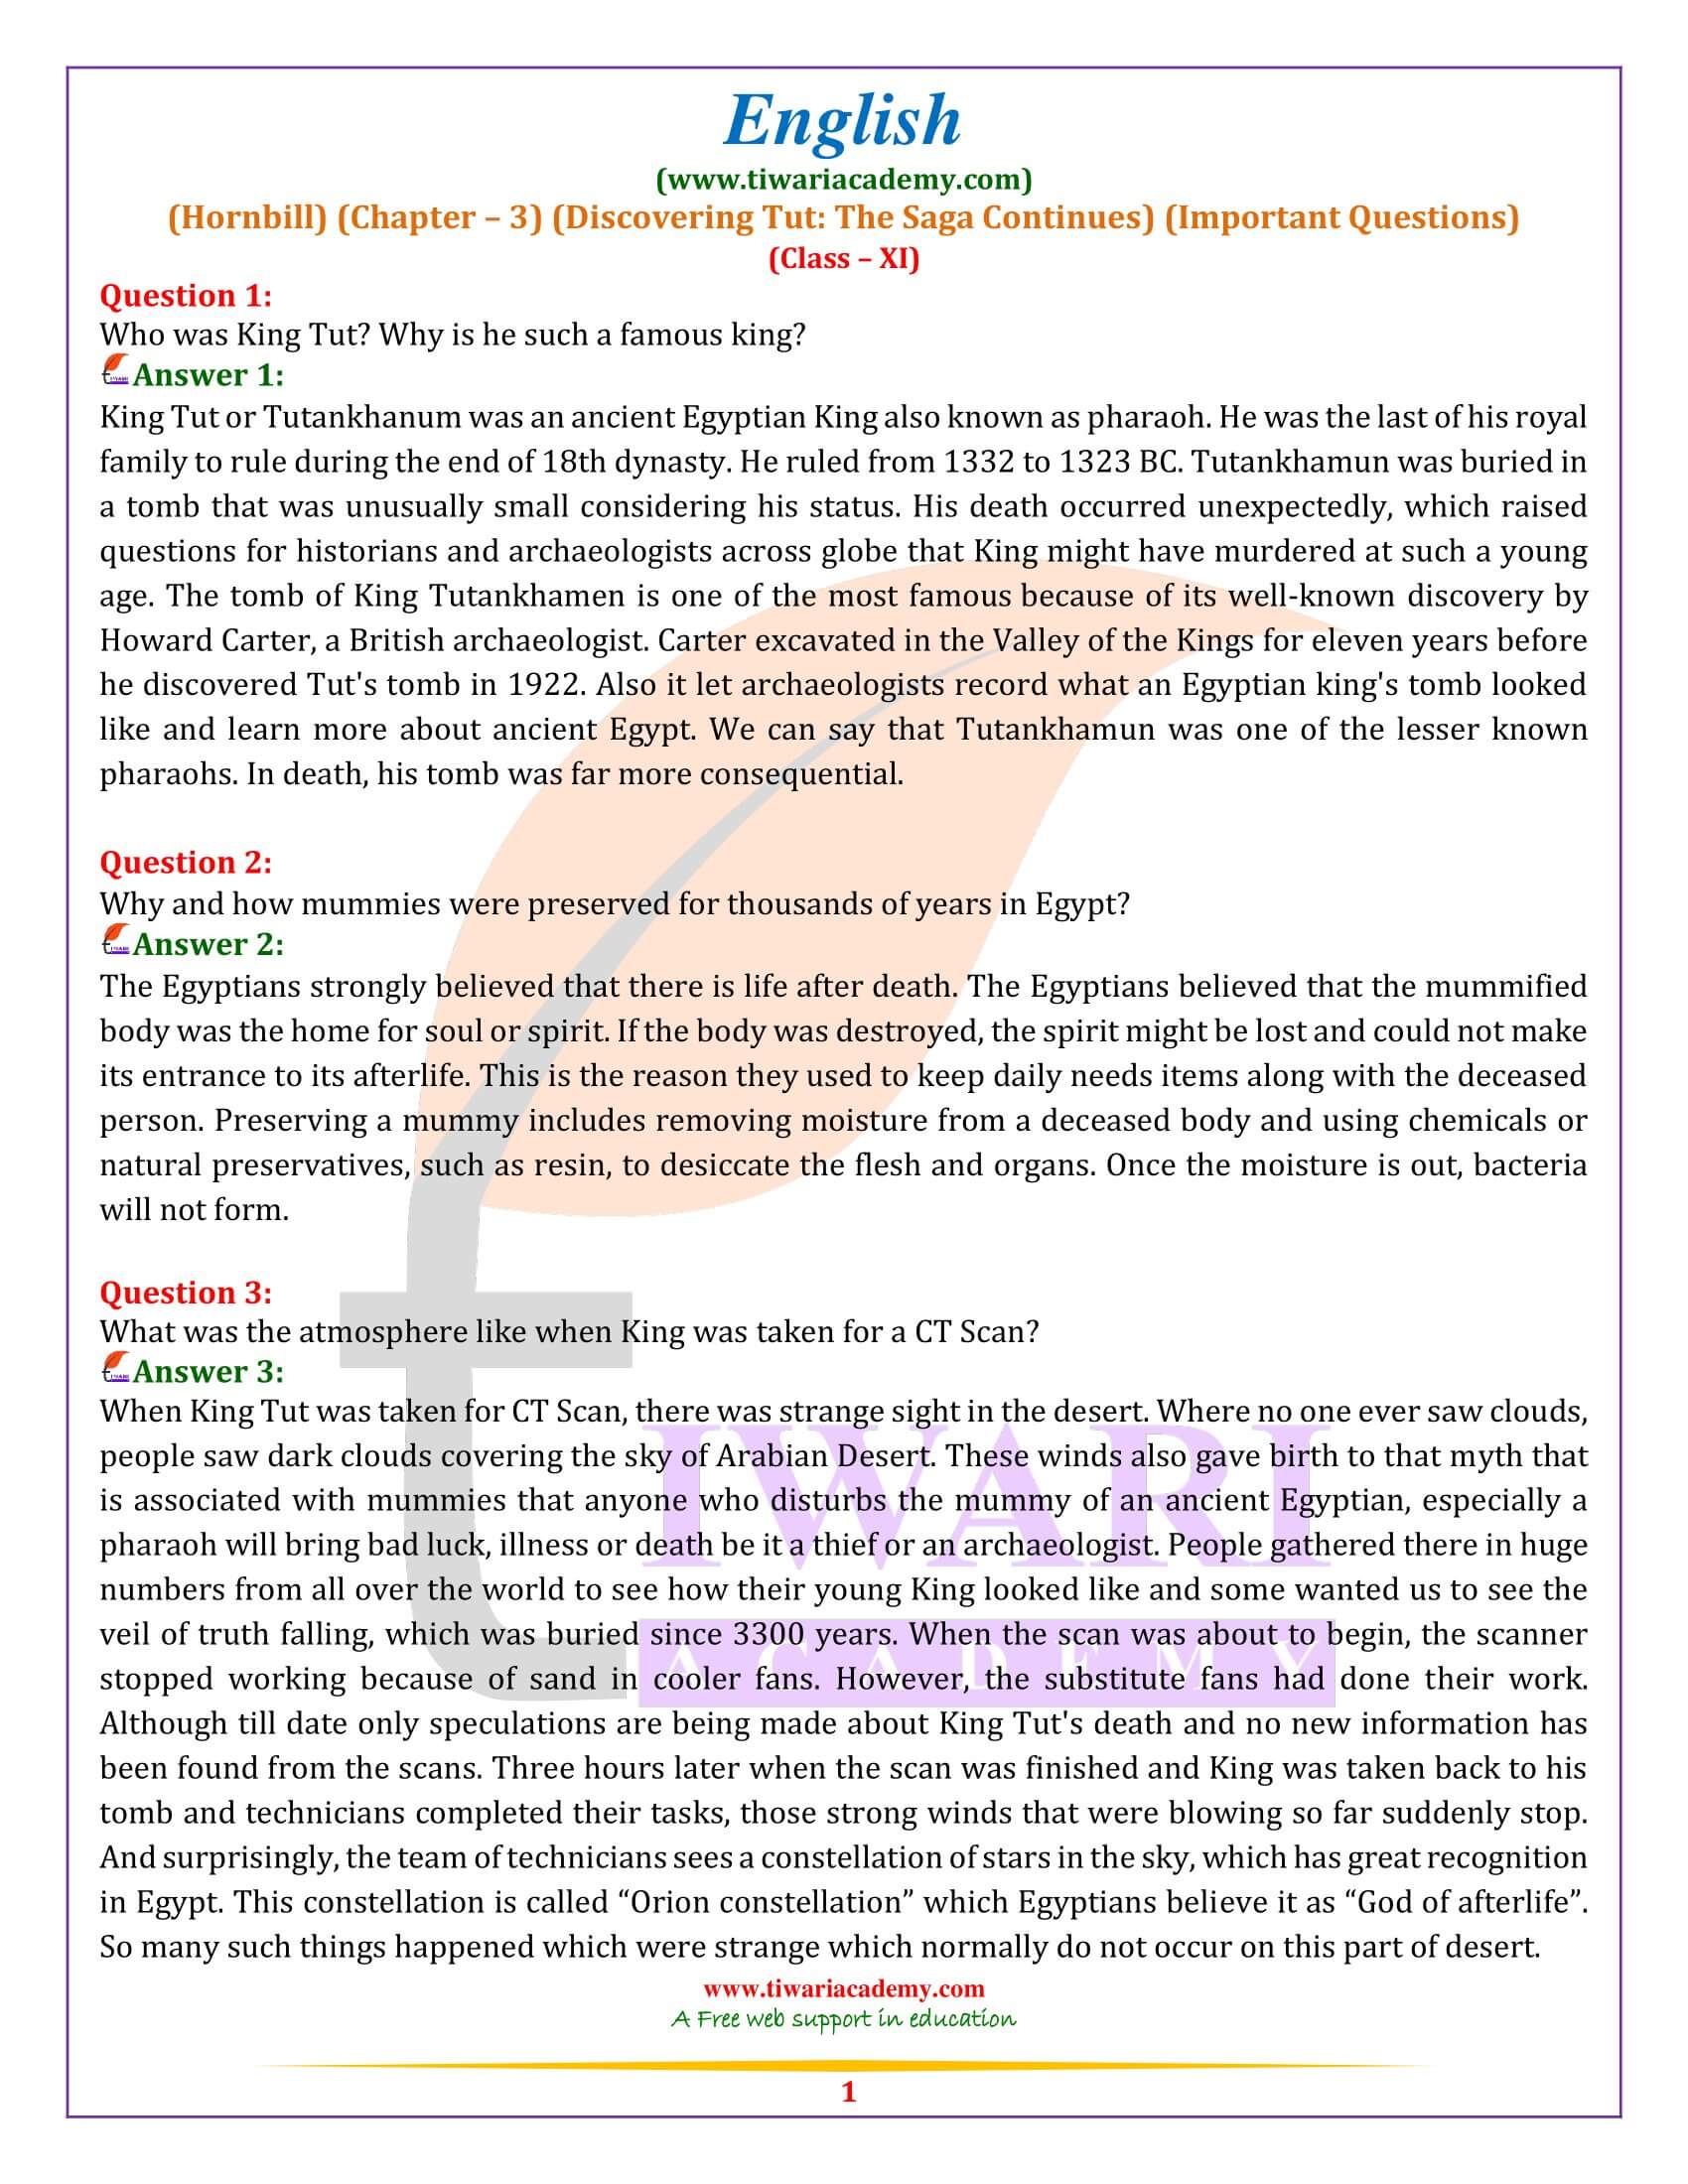 Class 11 English Hornbill Chapter 3 Important Questions